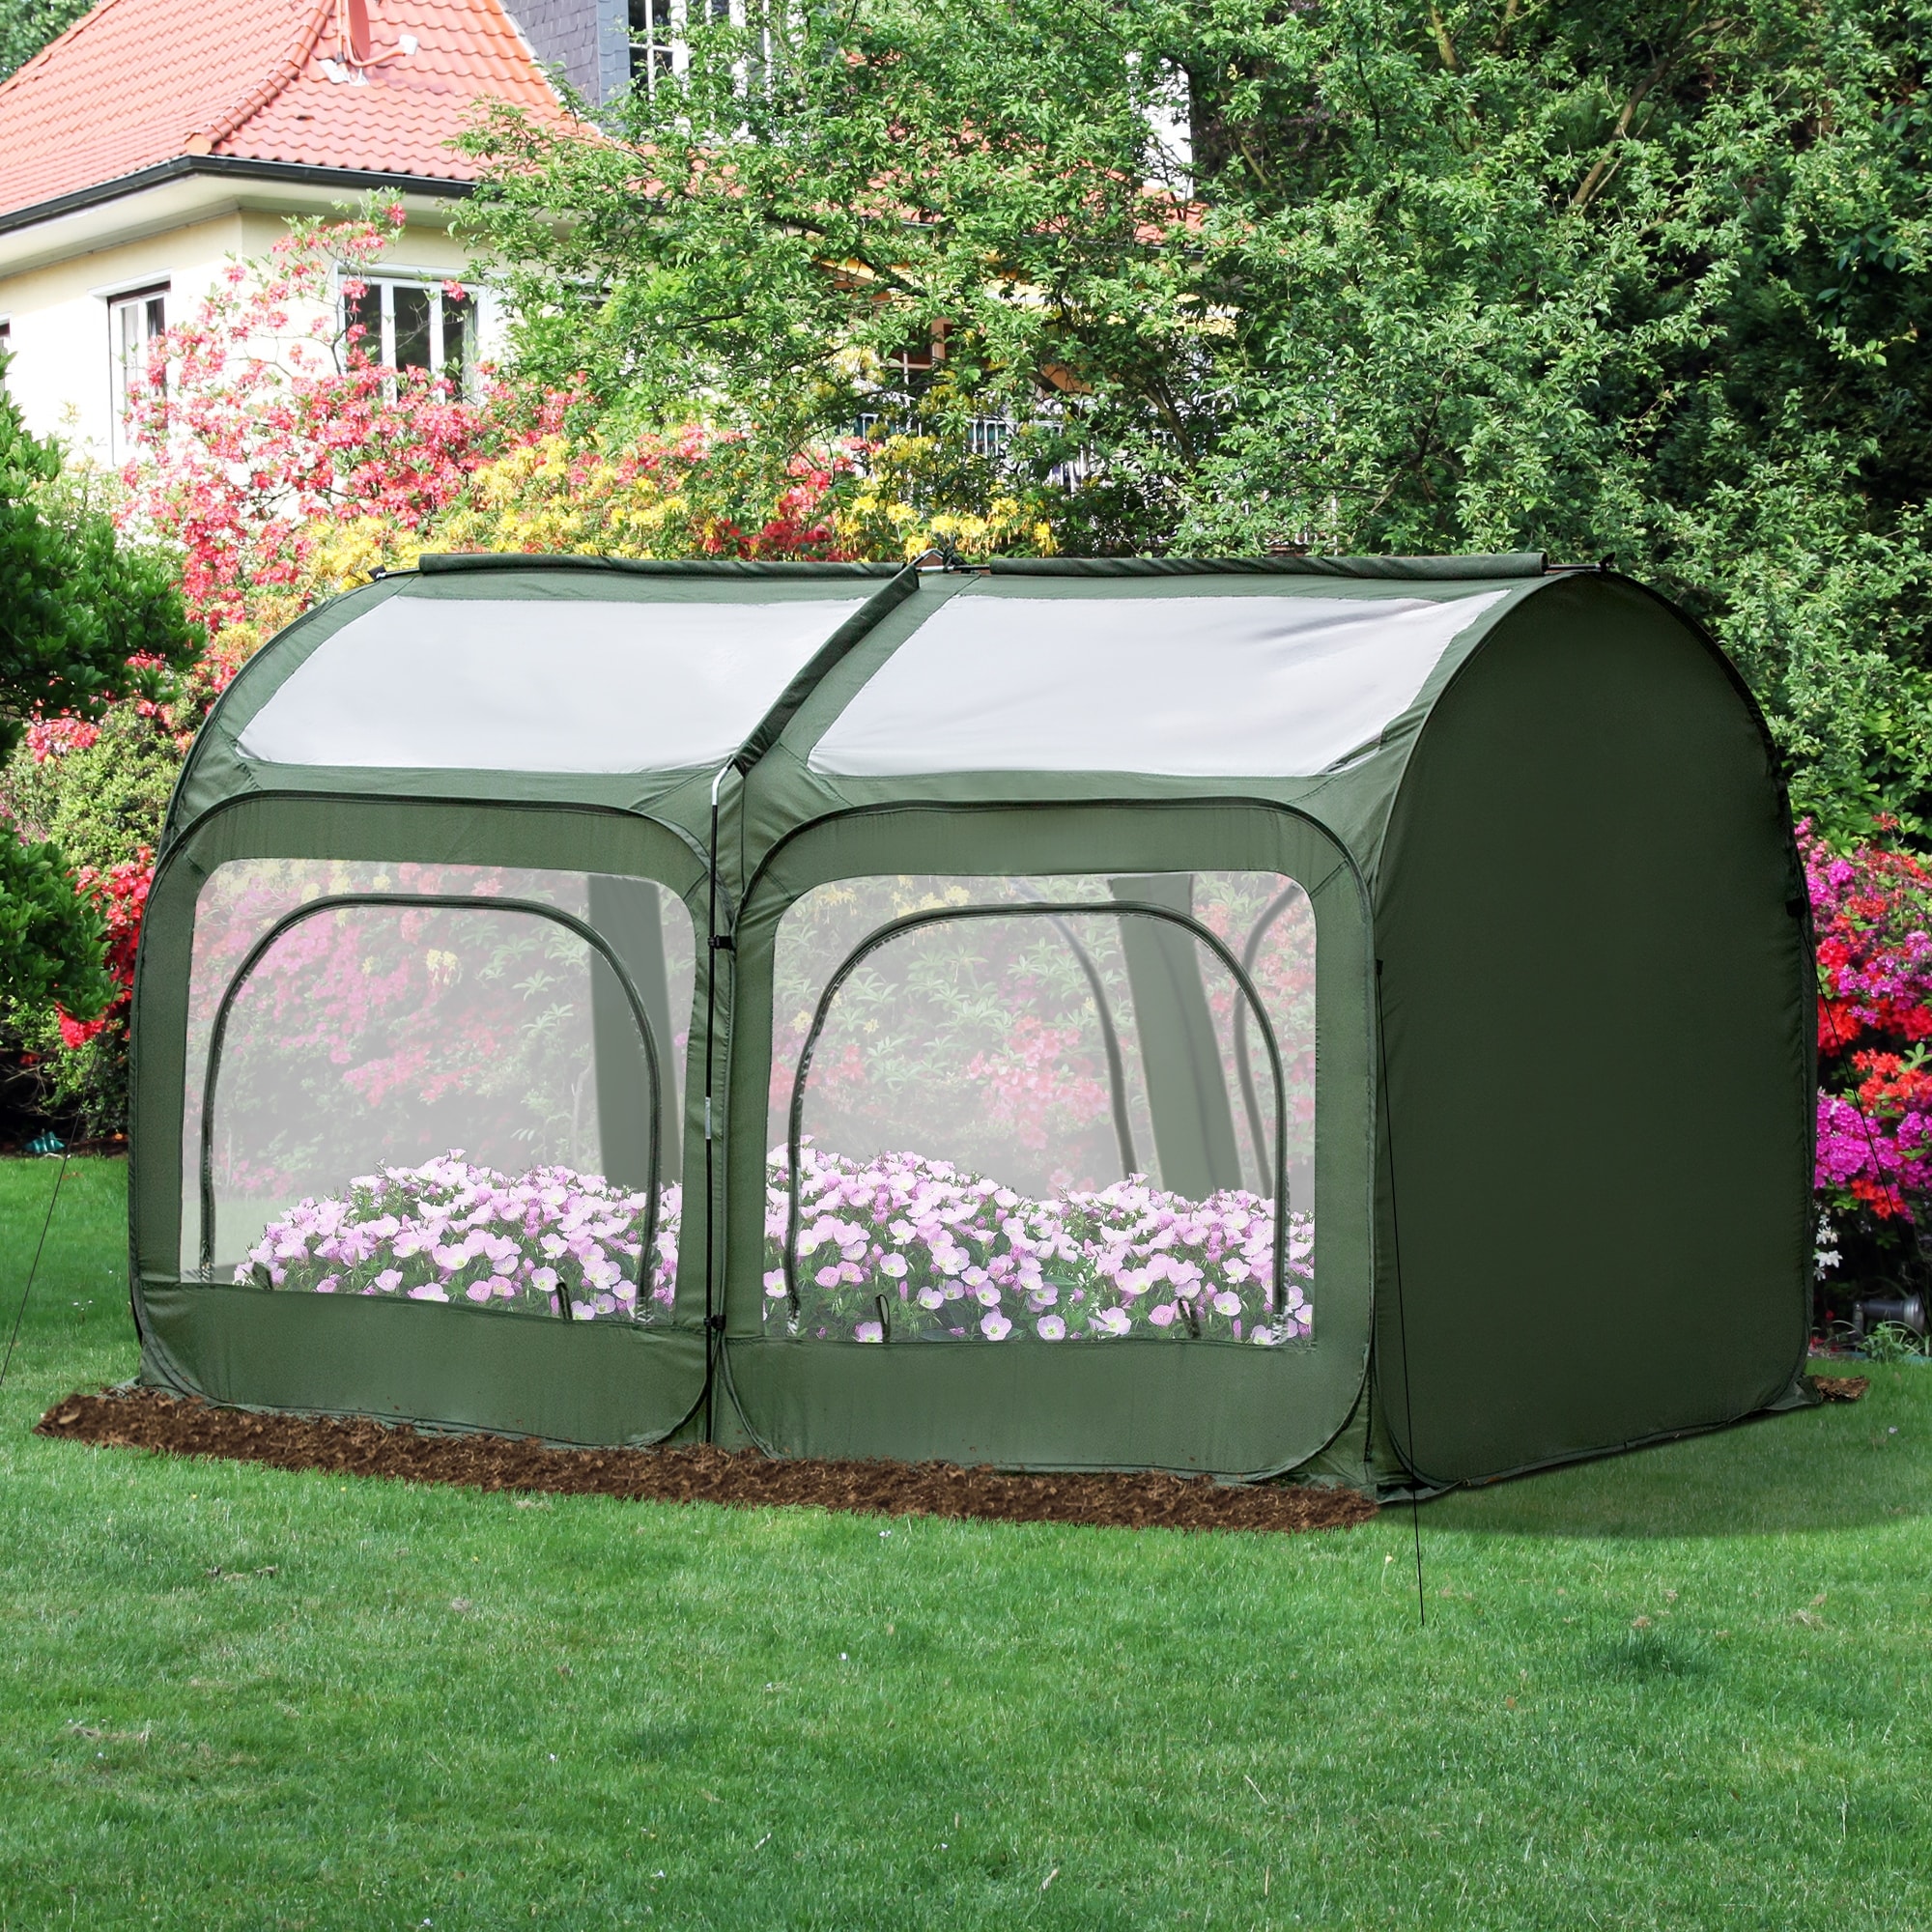 ABCCANOPY Mini Greenhouse 4 Tiers Portable Gardening Greenhouse with Zippered Door for Indoor Outdoor Use Transparent PVC Cover 